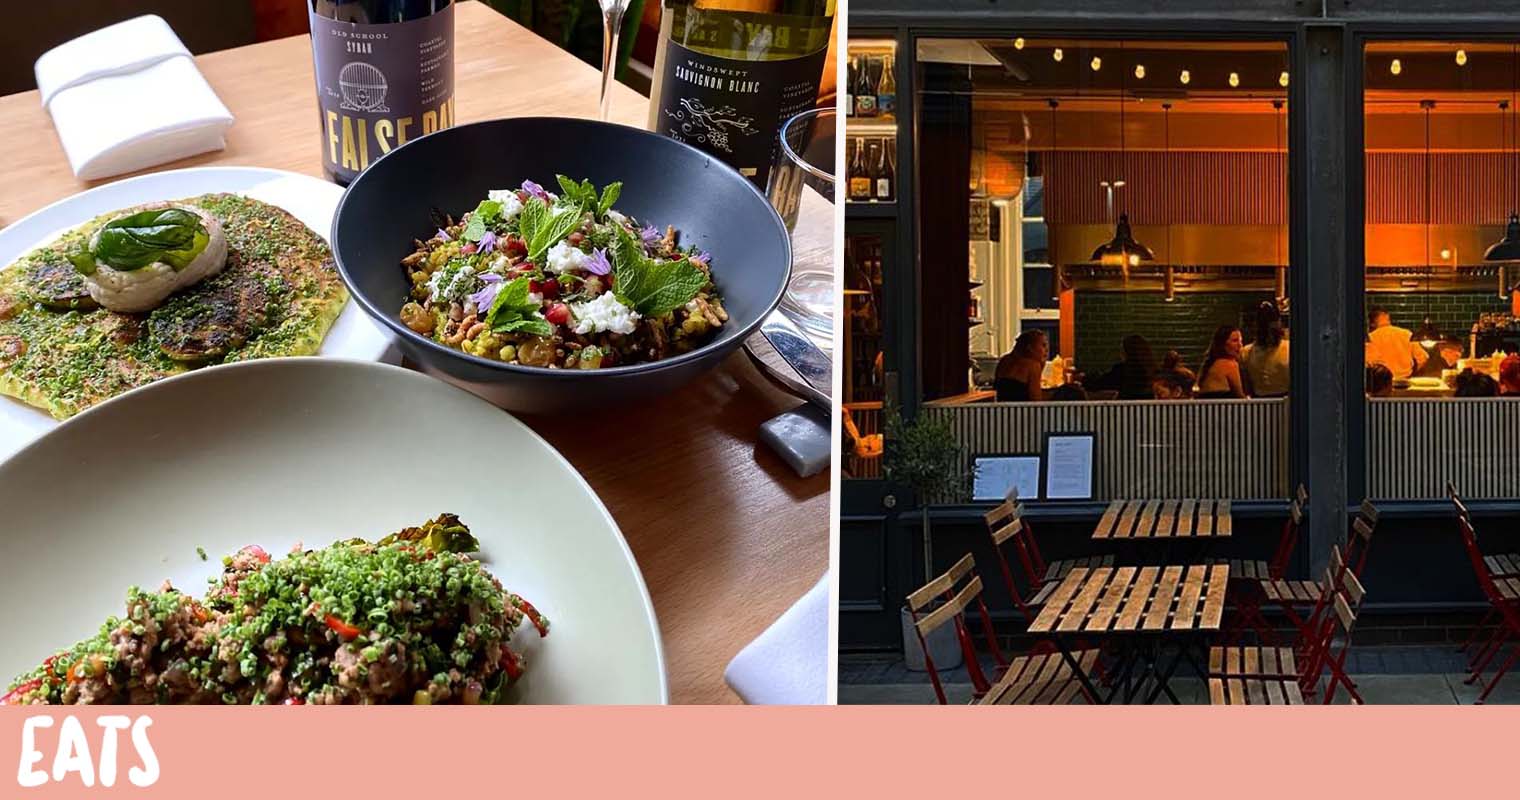 Two Manchester restaurants shortlisted for the Good Food Guide awards